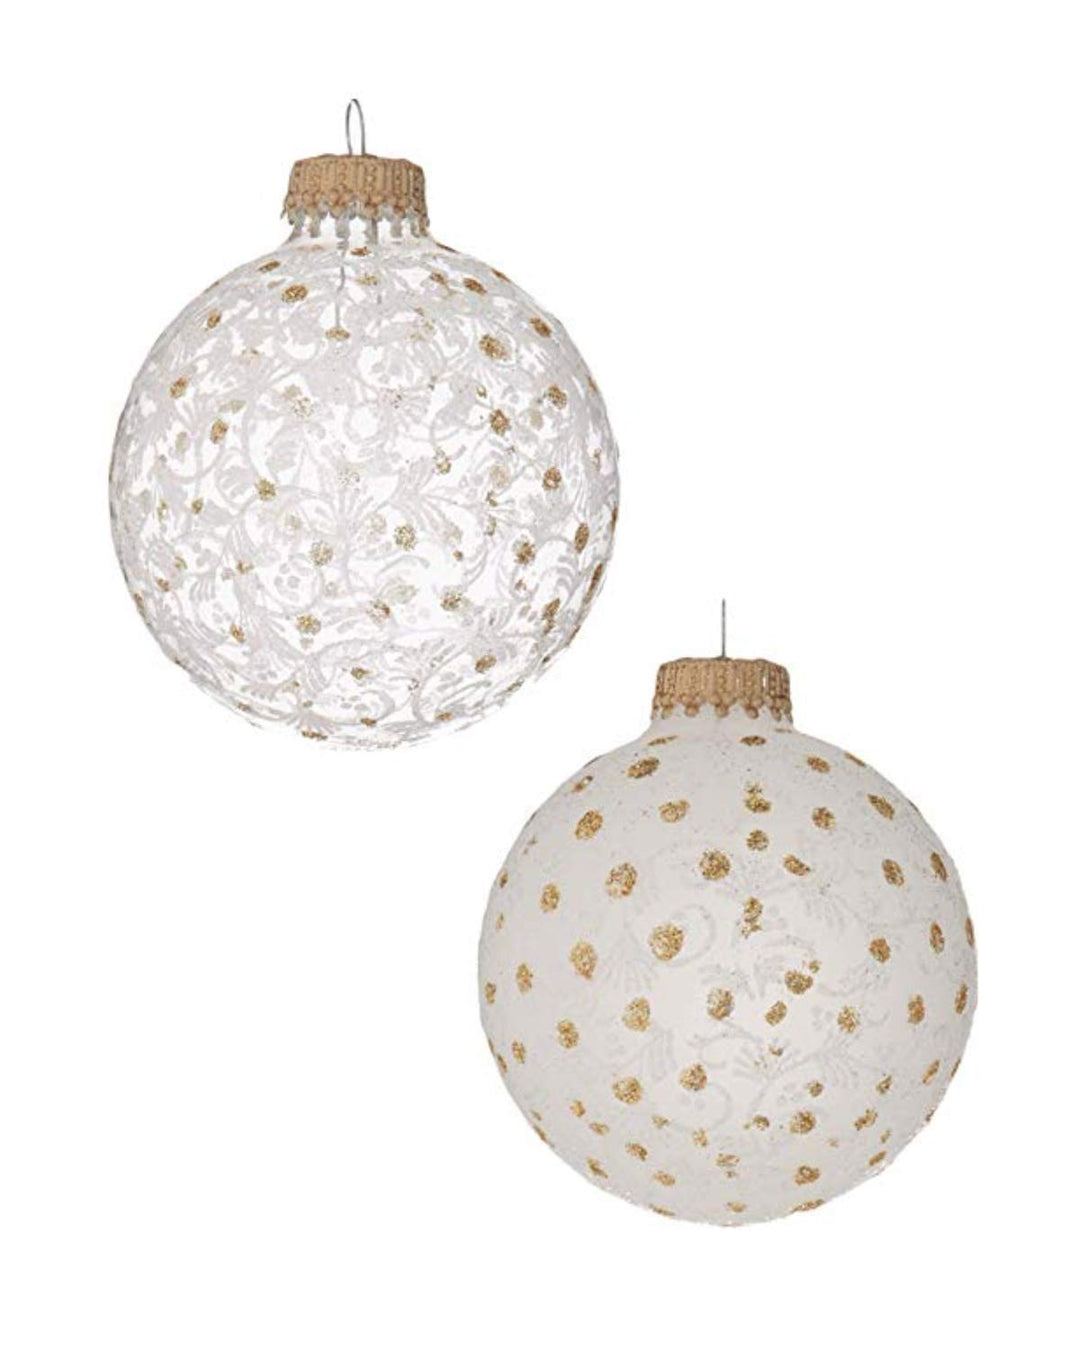 Glass Christmas Tree Ornaments - 67mm/2.63" [4 Pieces] Decorated Balls from Christmas by Krebs Seamless Hanging Holiday Decor (Clear and Frost with Lace and Gold Sparkles)